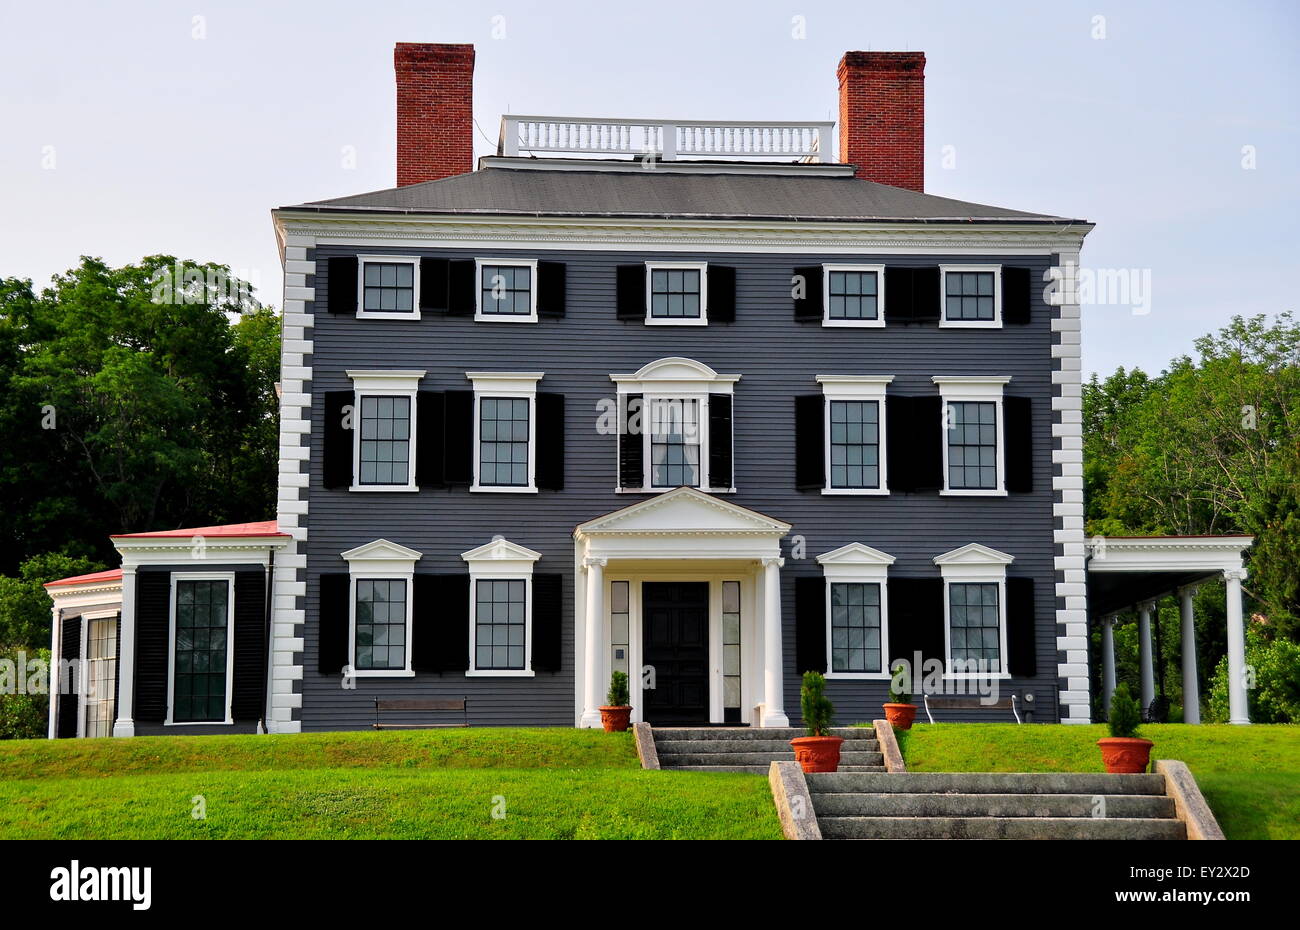 Lincoln, Massachusetts: 1790 Codman House, sometimes called The Grange, is a fine example of colonial federal architecture * Stock Photo